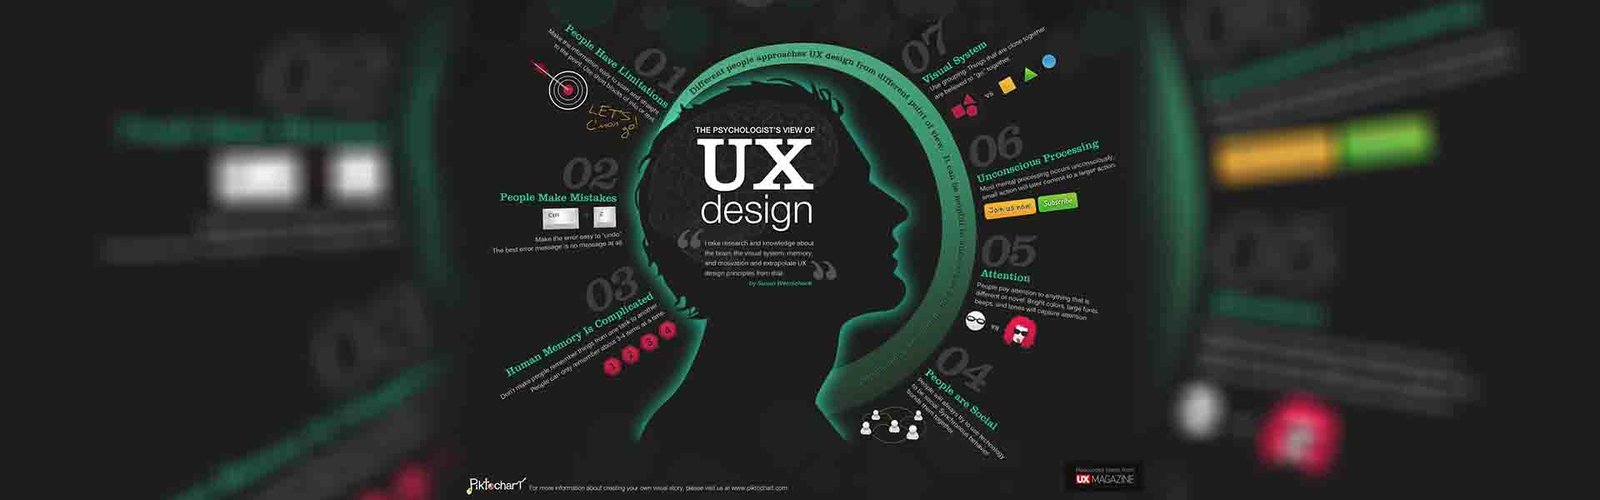 Crafting Digital Experiences Design: A Guide to Graphic & UI UX Design